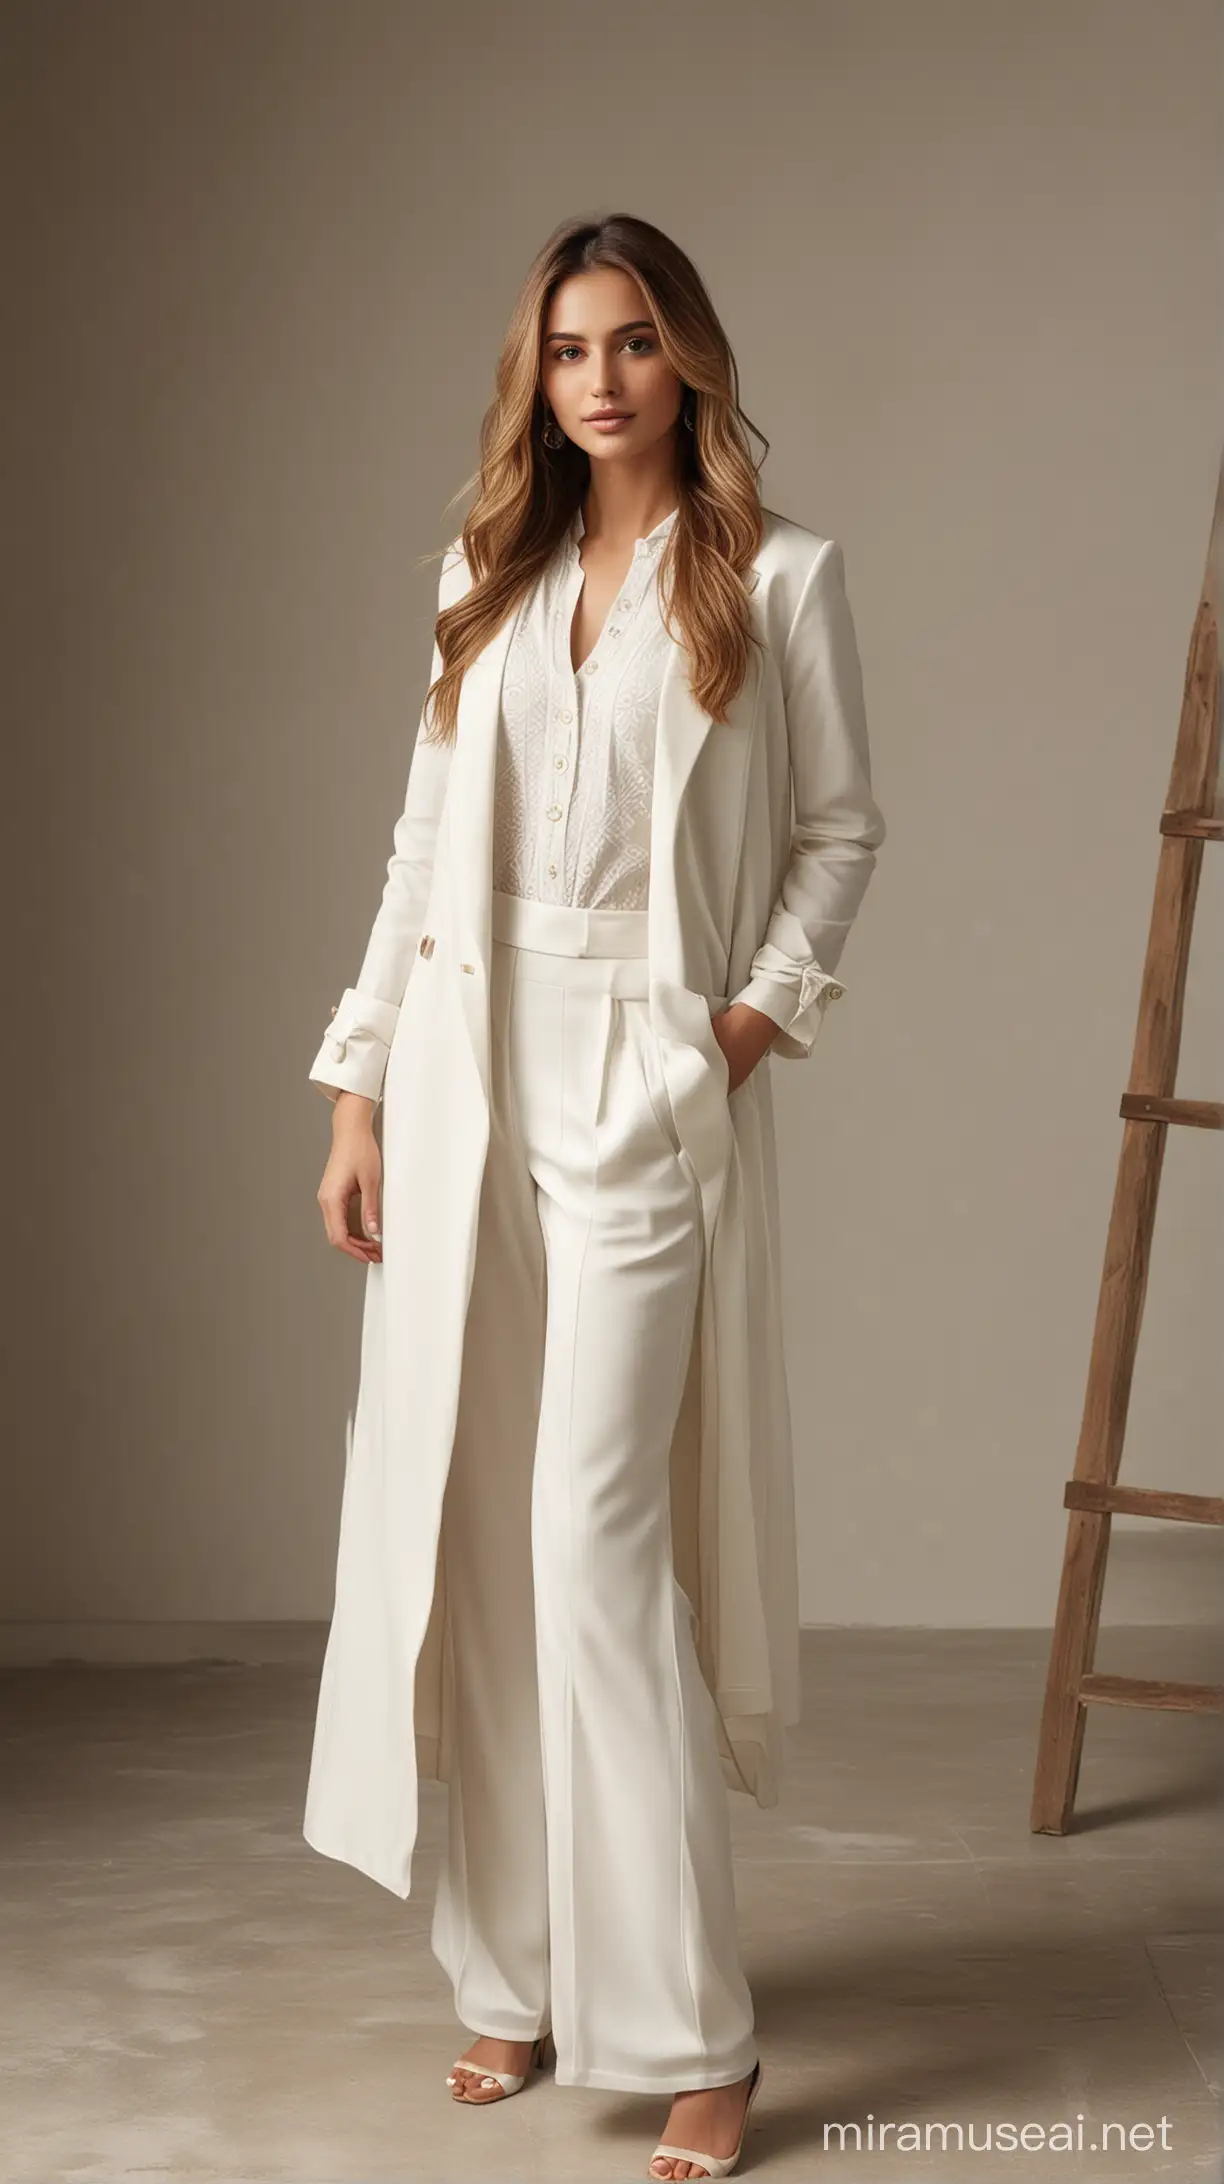 Sophisticated Vogue Style Photoshoot Elegant Model in White Attire and Tailored Blazer